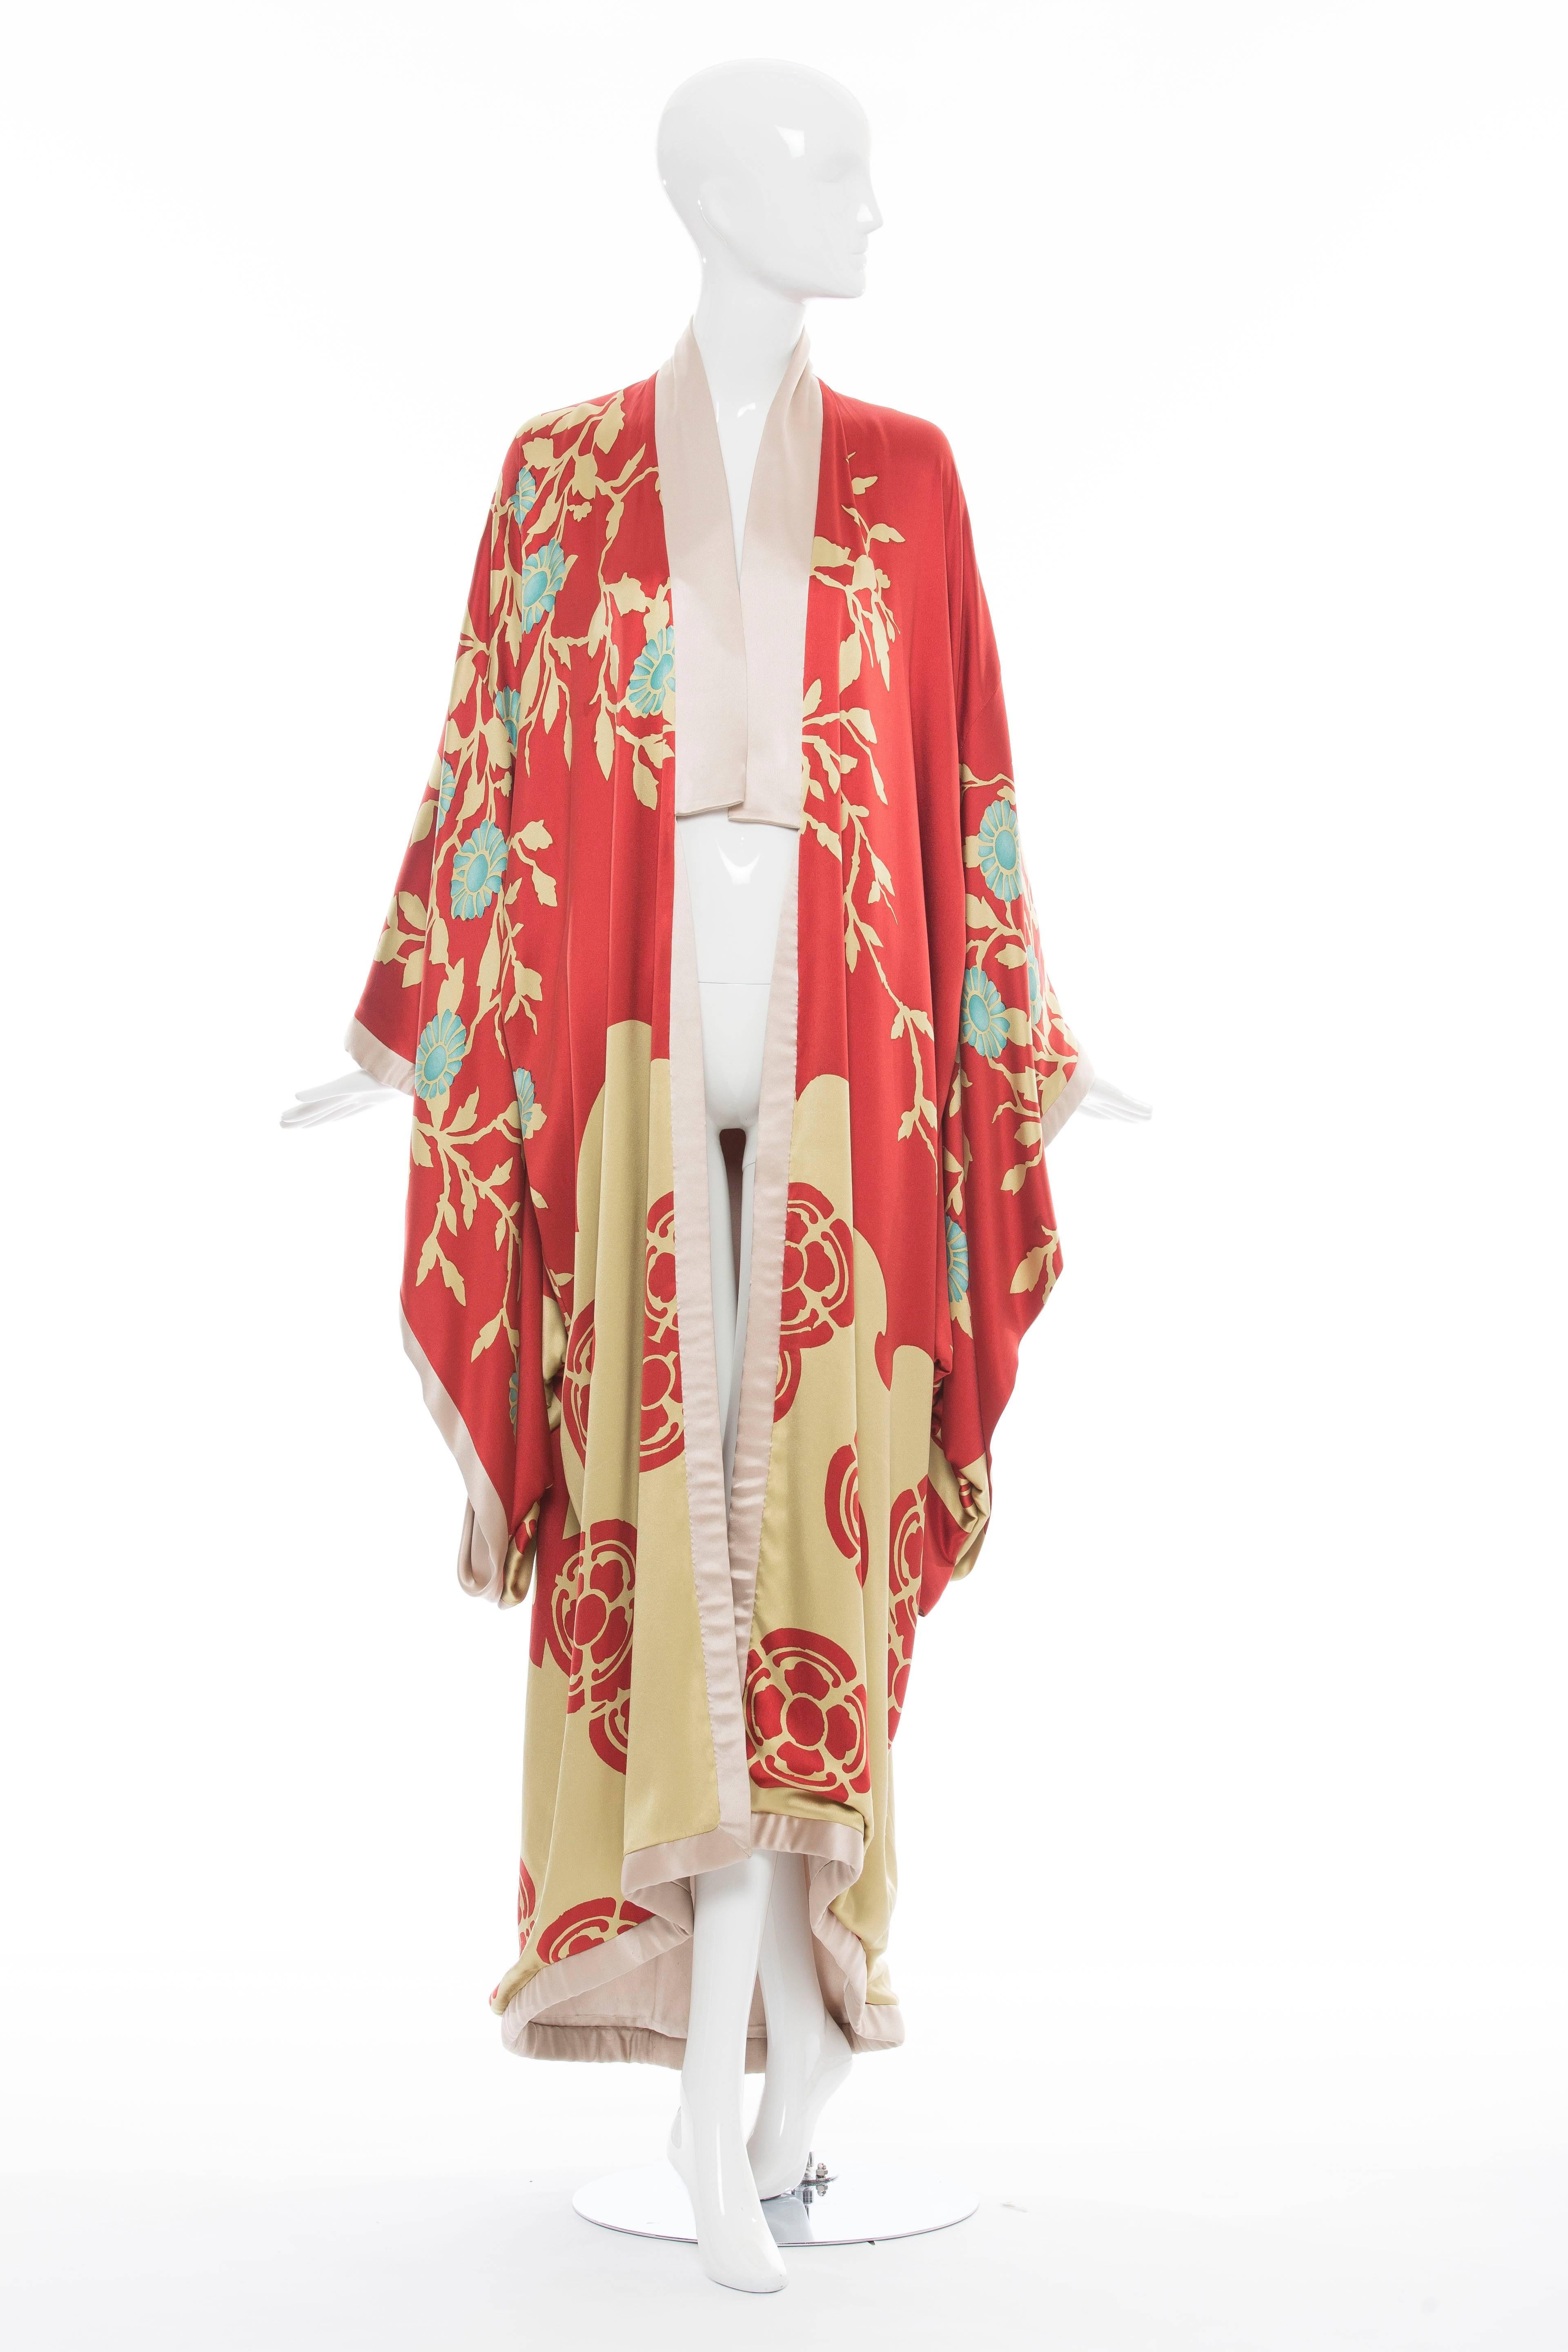 Tom Ford for Gucci, S/S 2003, Men's silk kimono with shawl lapel, draping at sleeves and open front.

The robe was gifted by Tom Ford to the Metropolitan Museum of Art in 2004 and is documented in the Tom Ford book on page 279.

Chest 60”,